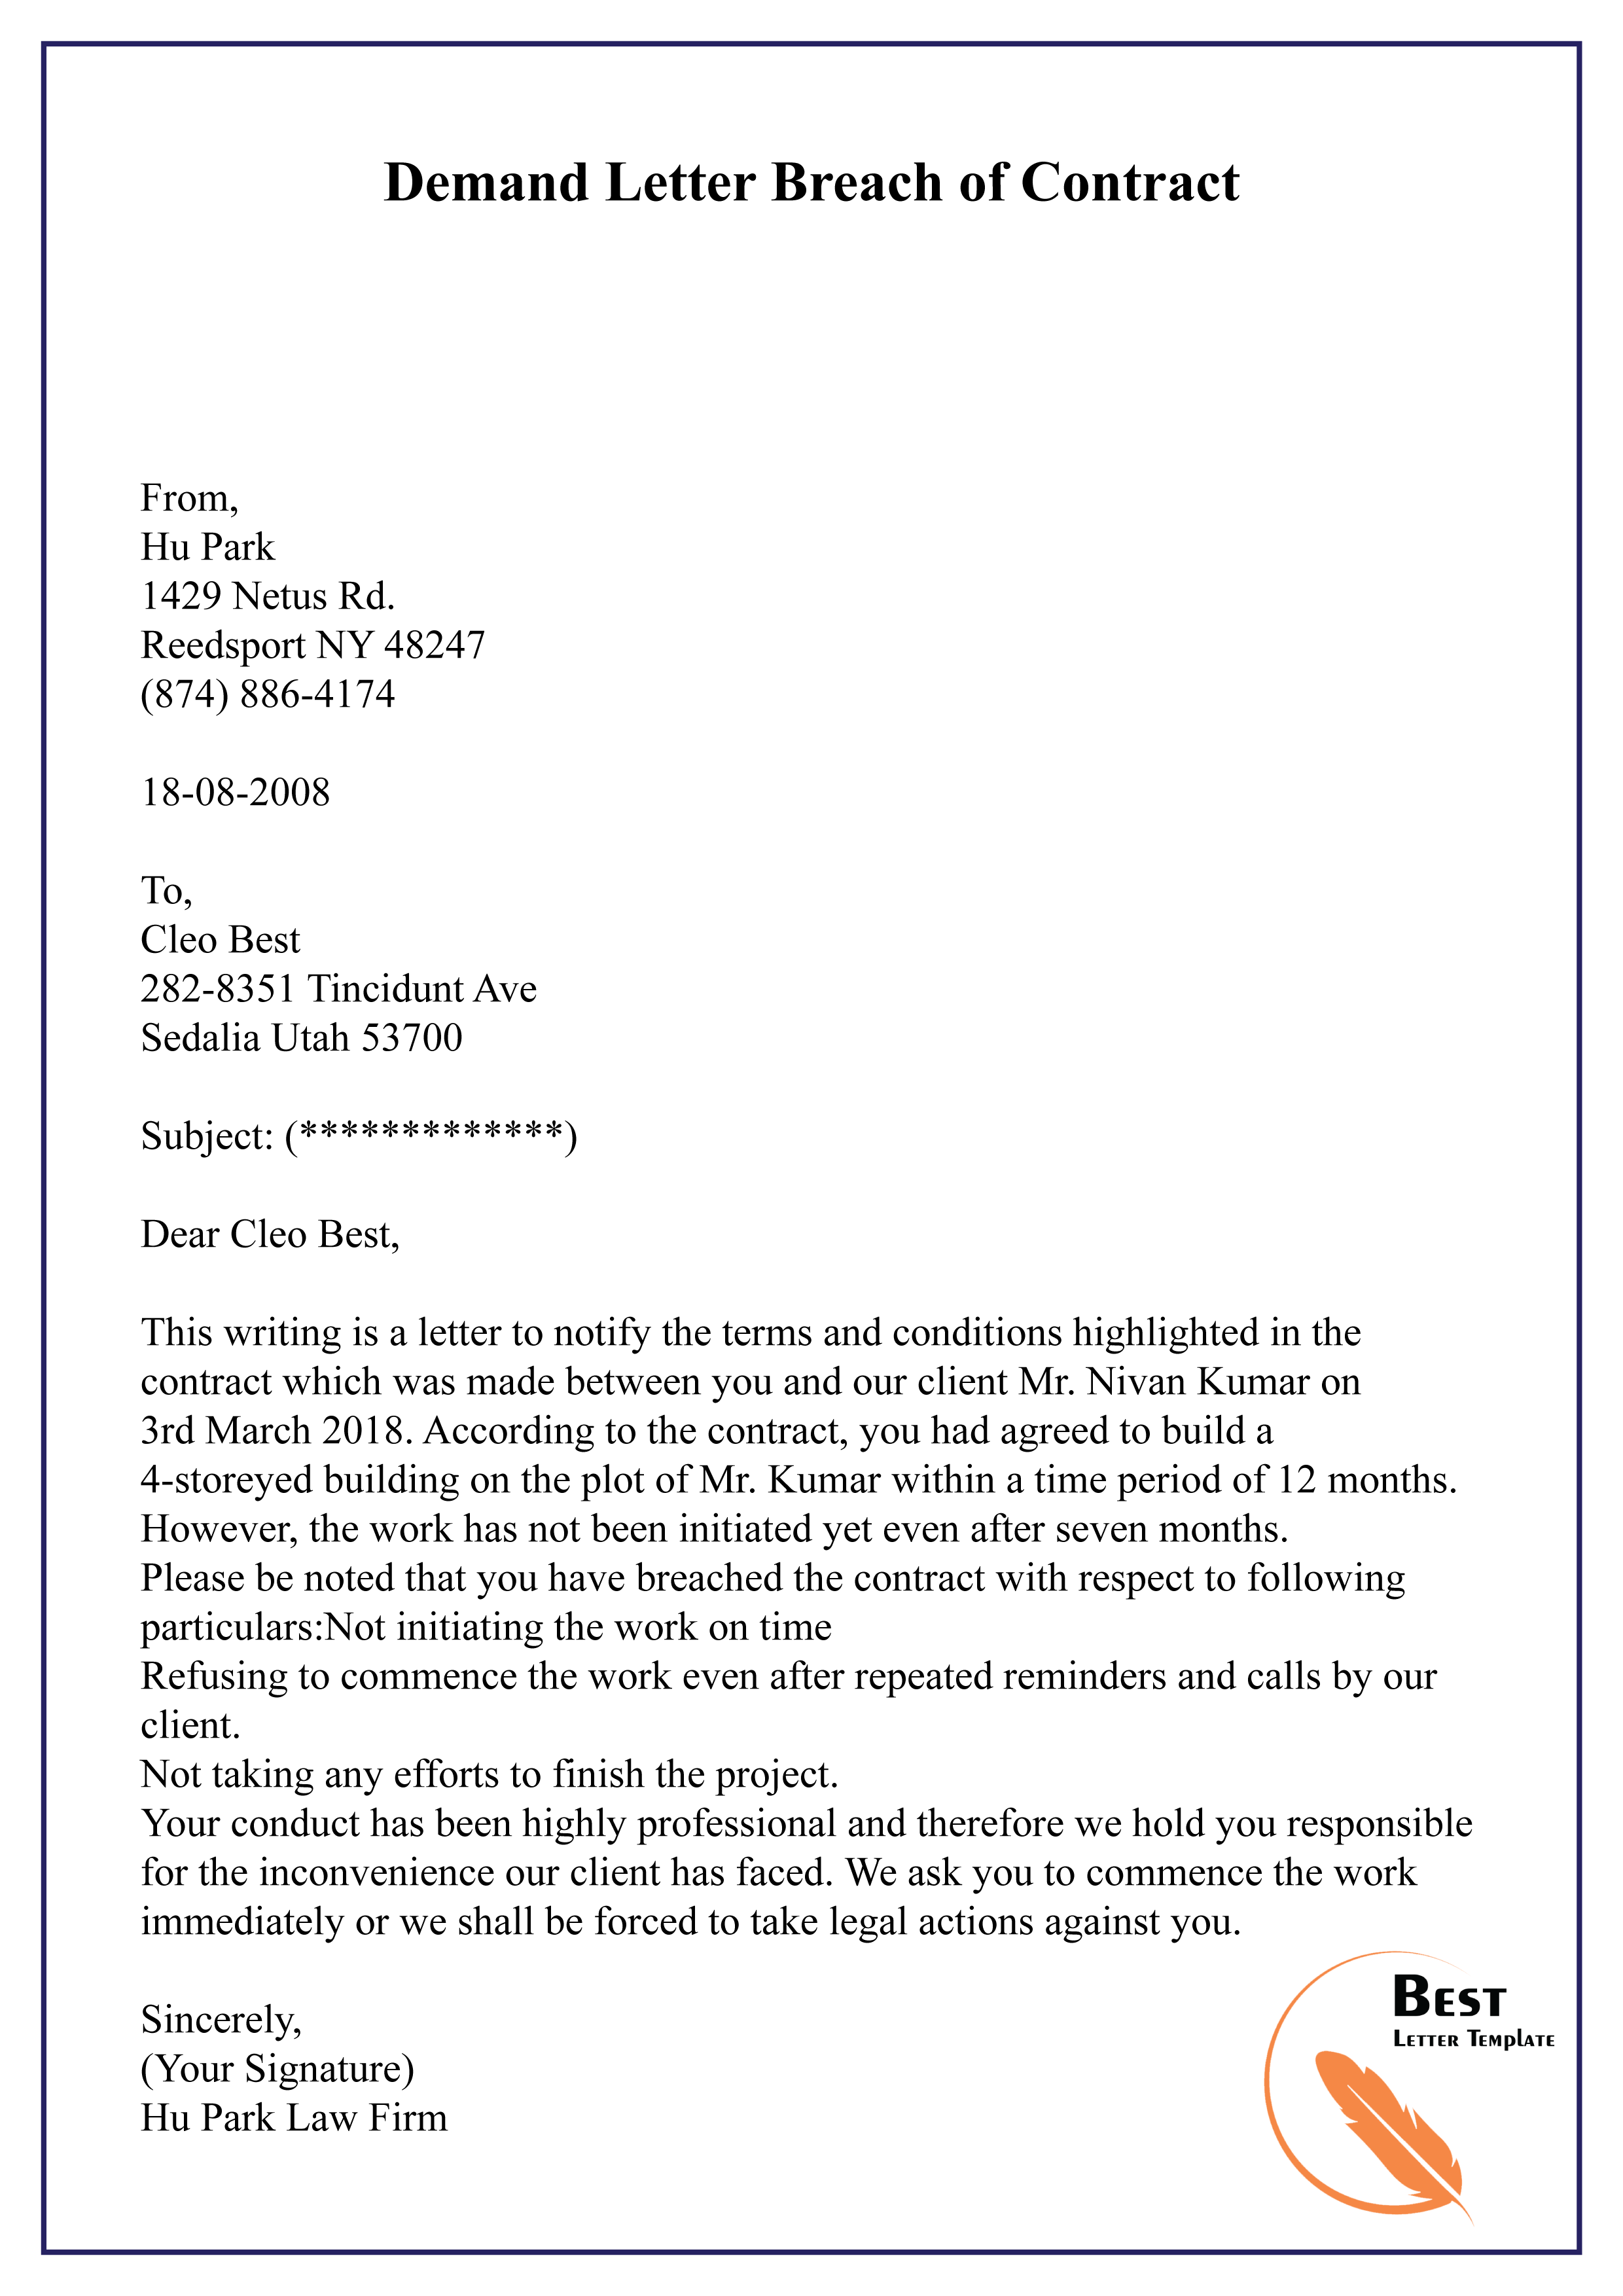 Demand Letter Breach of Contract01 Best Letter Template